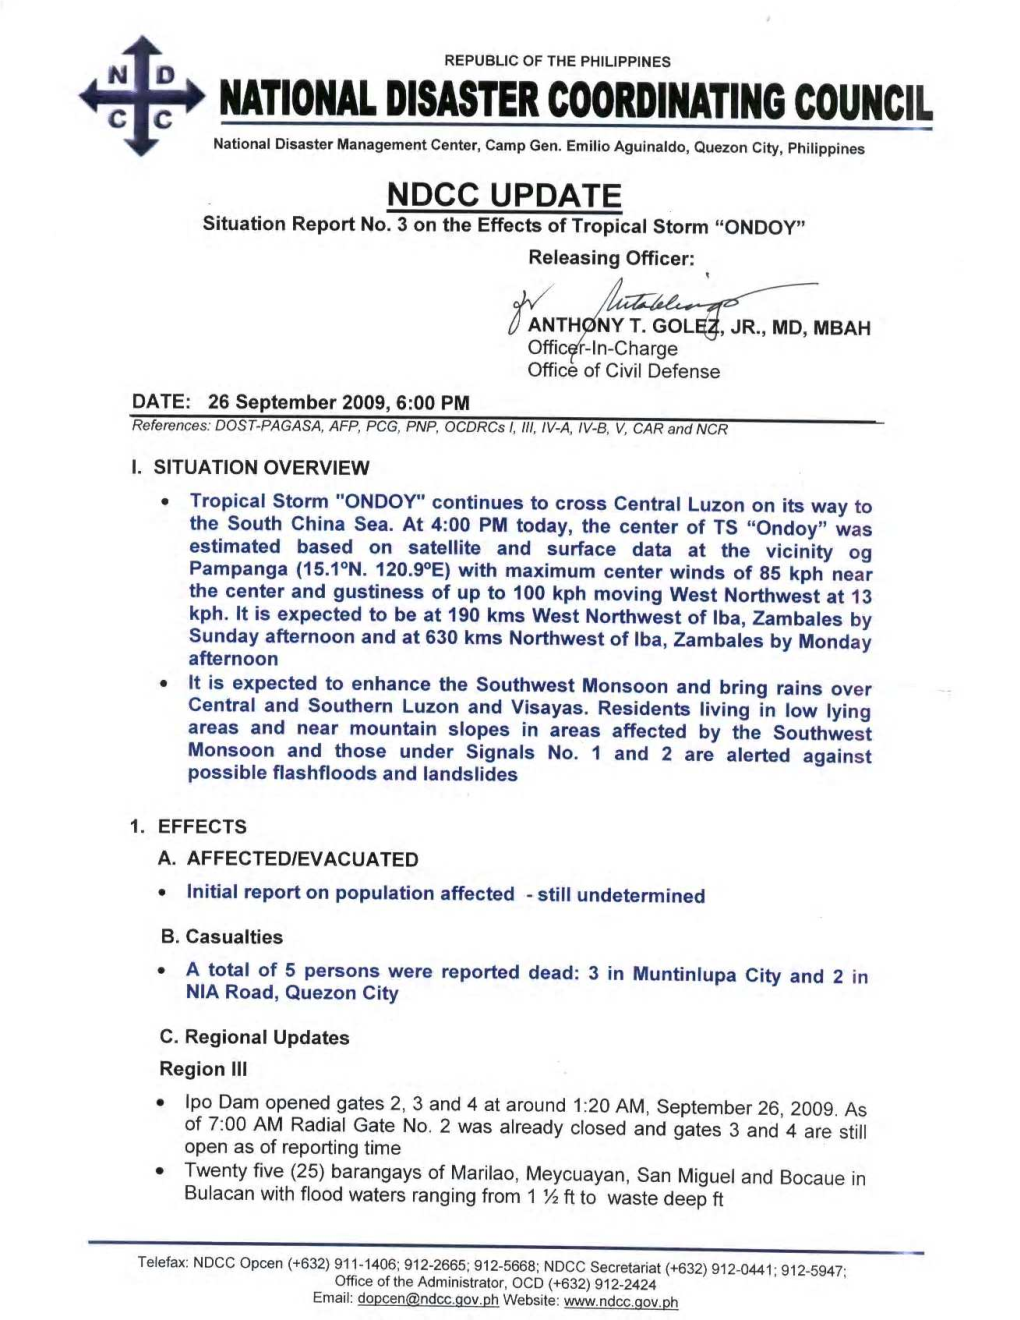 NDCC Sitrep No 3 on the Effects of TS Ondoy As of 26 Sept 2009